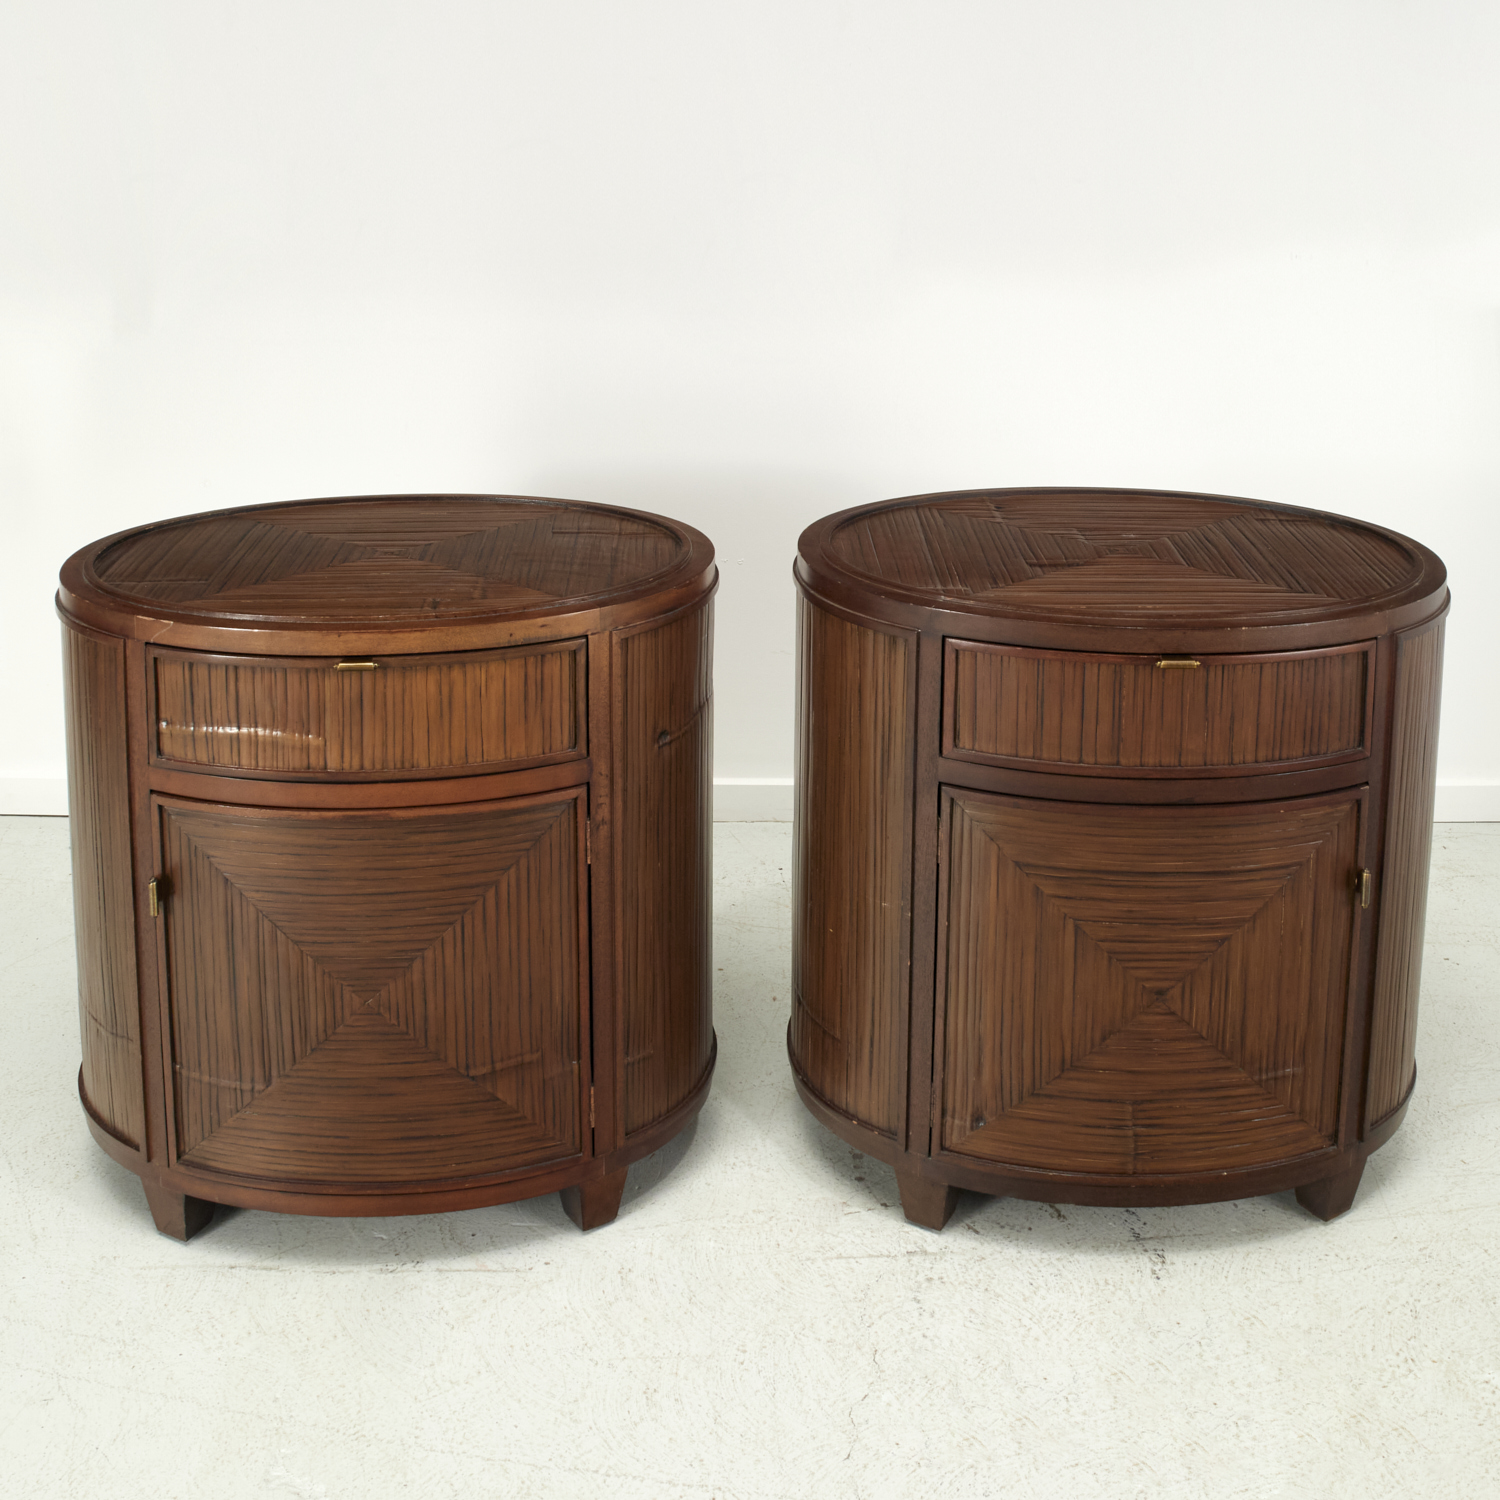 PAIR MCGUIRE "FAUBOURG" SPLIT BAMBOO